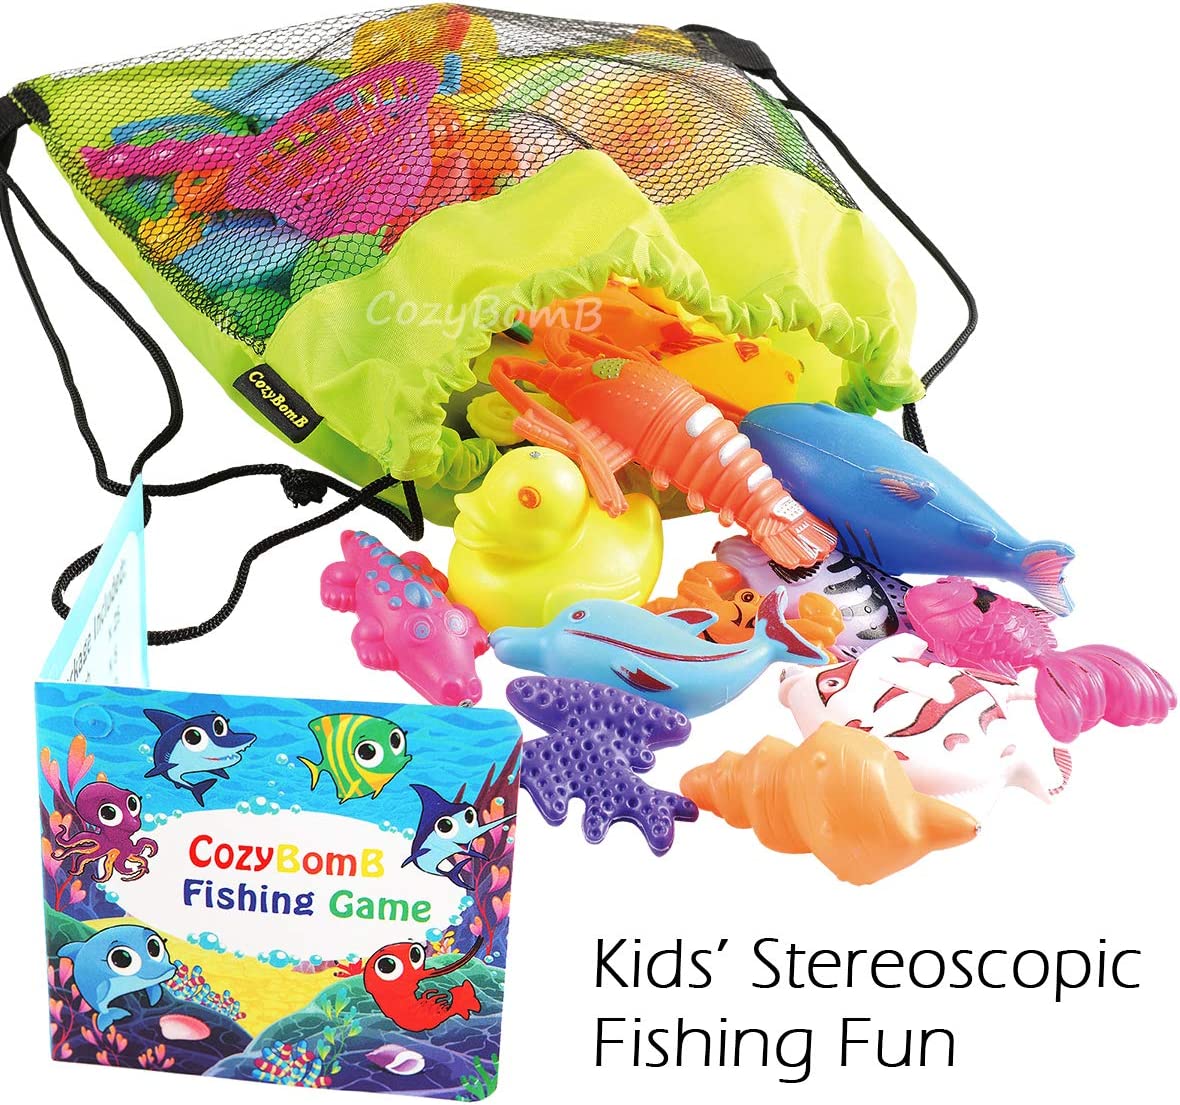 Cozybomb Magnetic Fishing Toys Game Set for Kids for Bath Time Pool Party with Pole Rod Net, Plastic Floating Fish - Toddler Education Teaching and Learning Colors Ocean Sea Animals (Large) - FoxMart™️ - 3 years and up